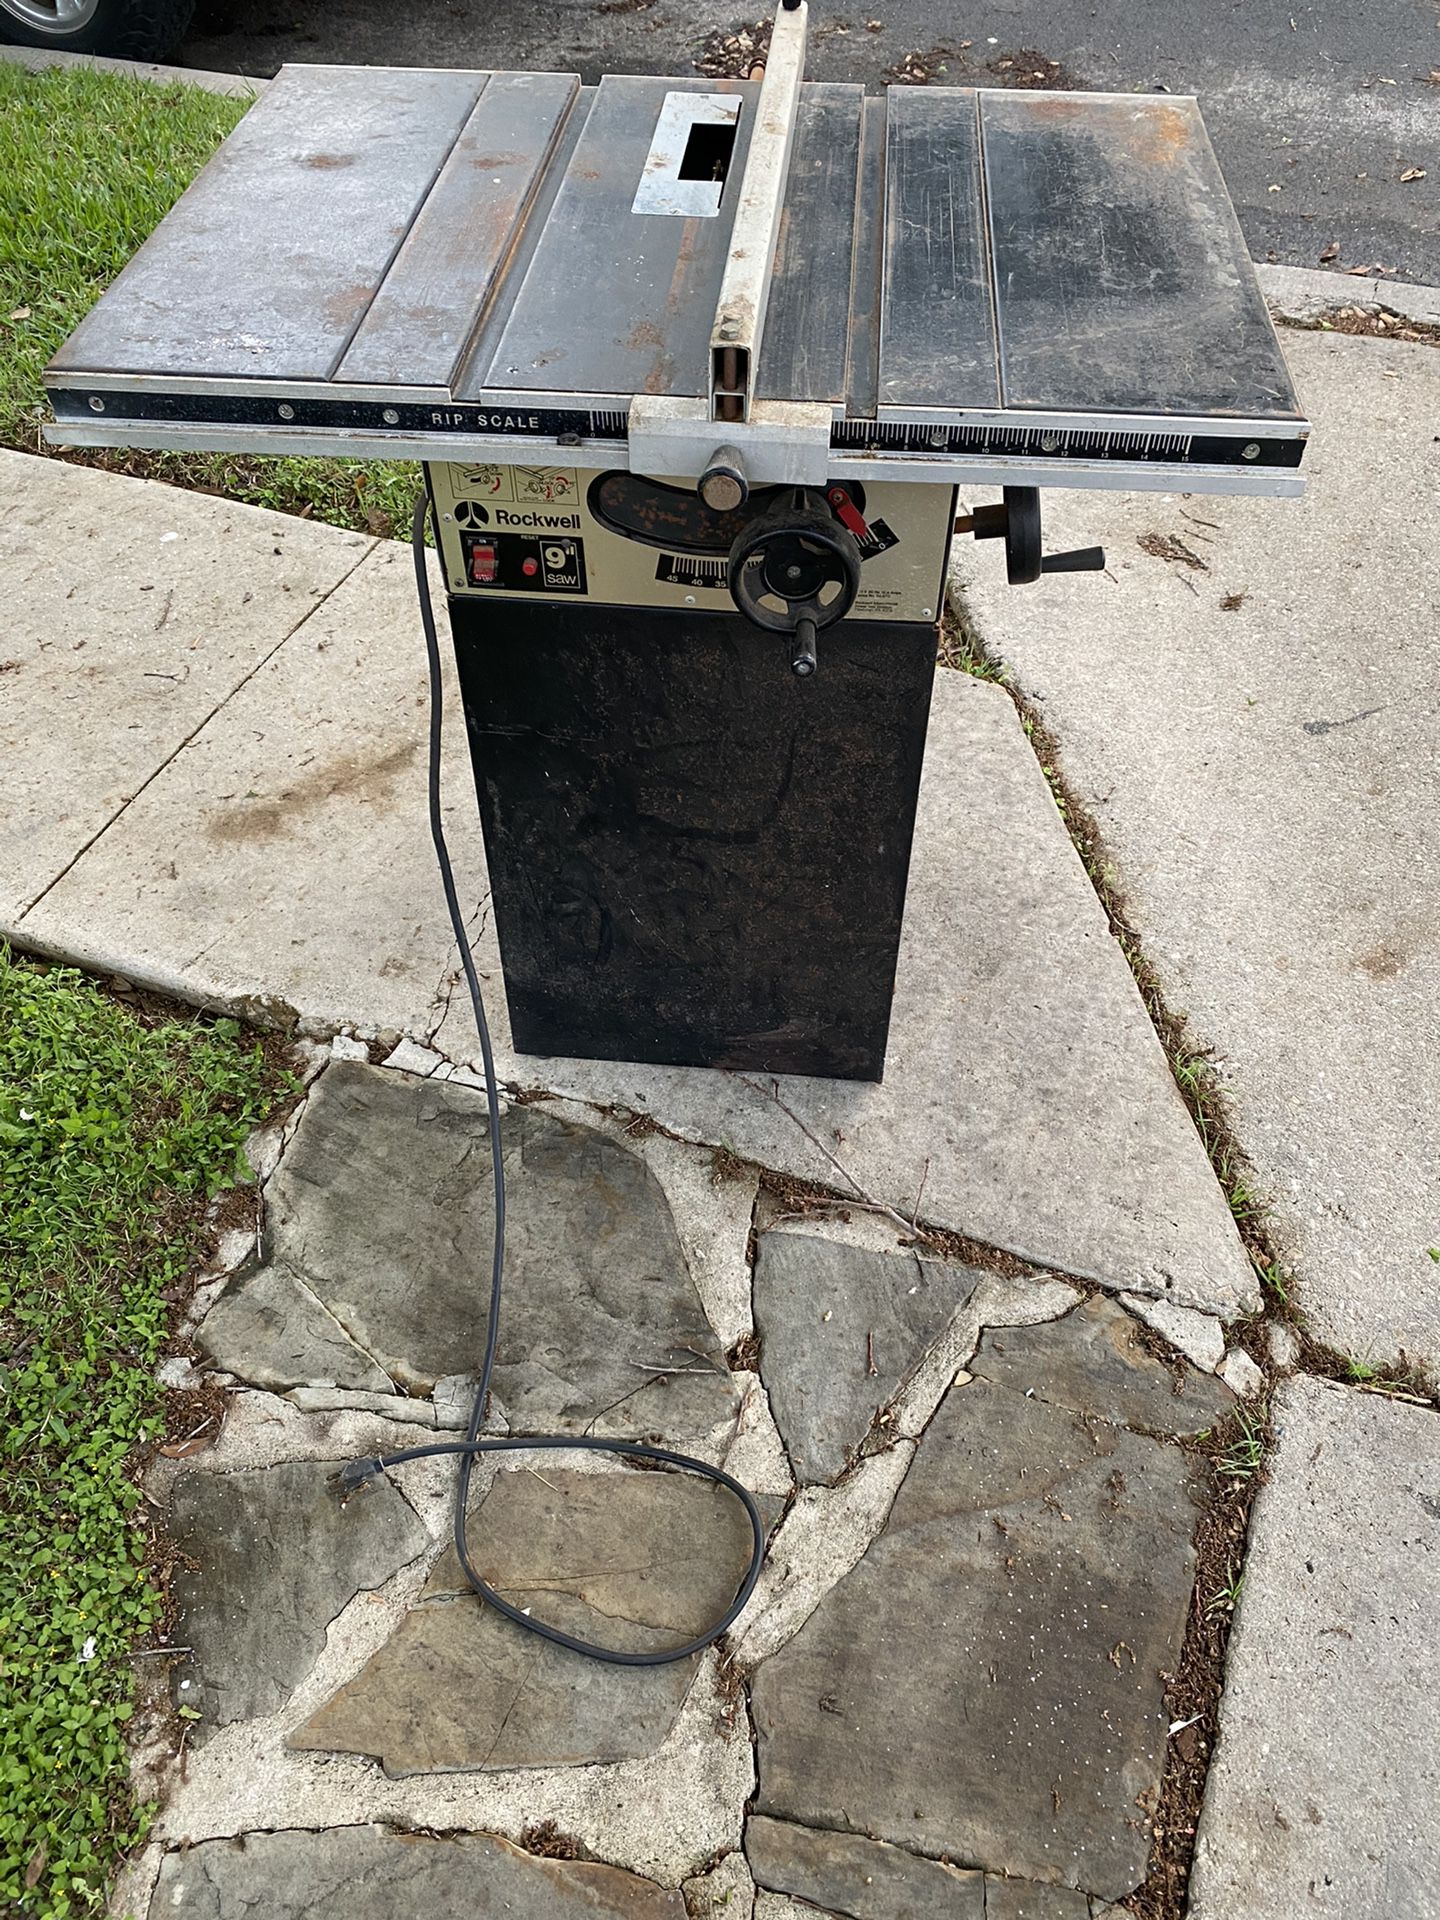 Rockwell table saw